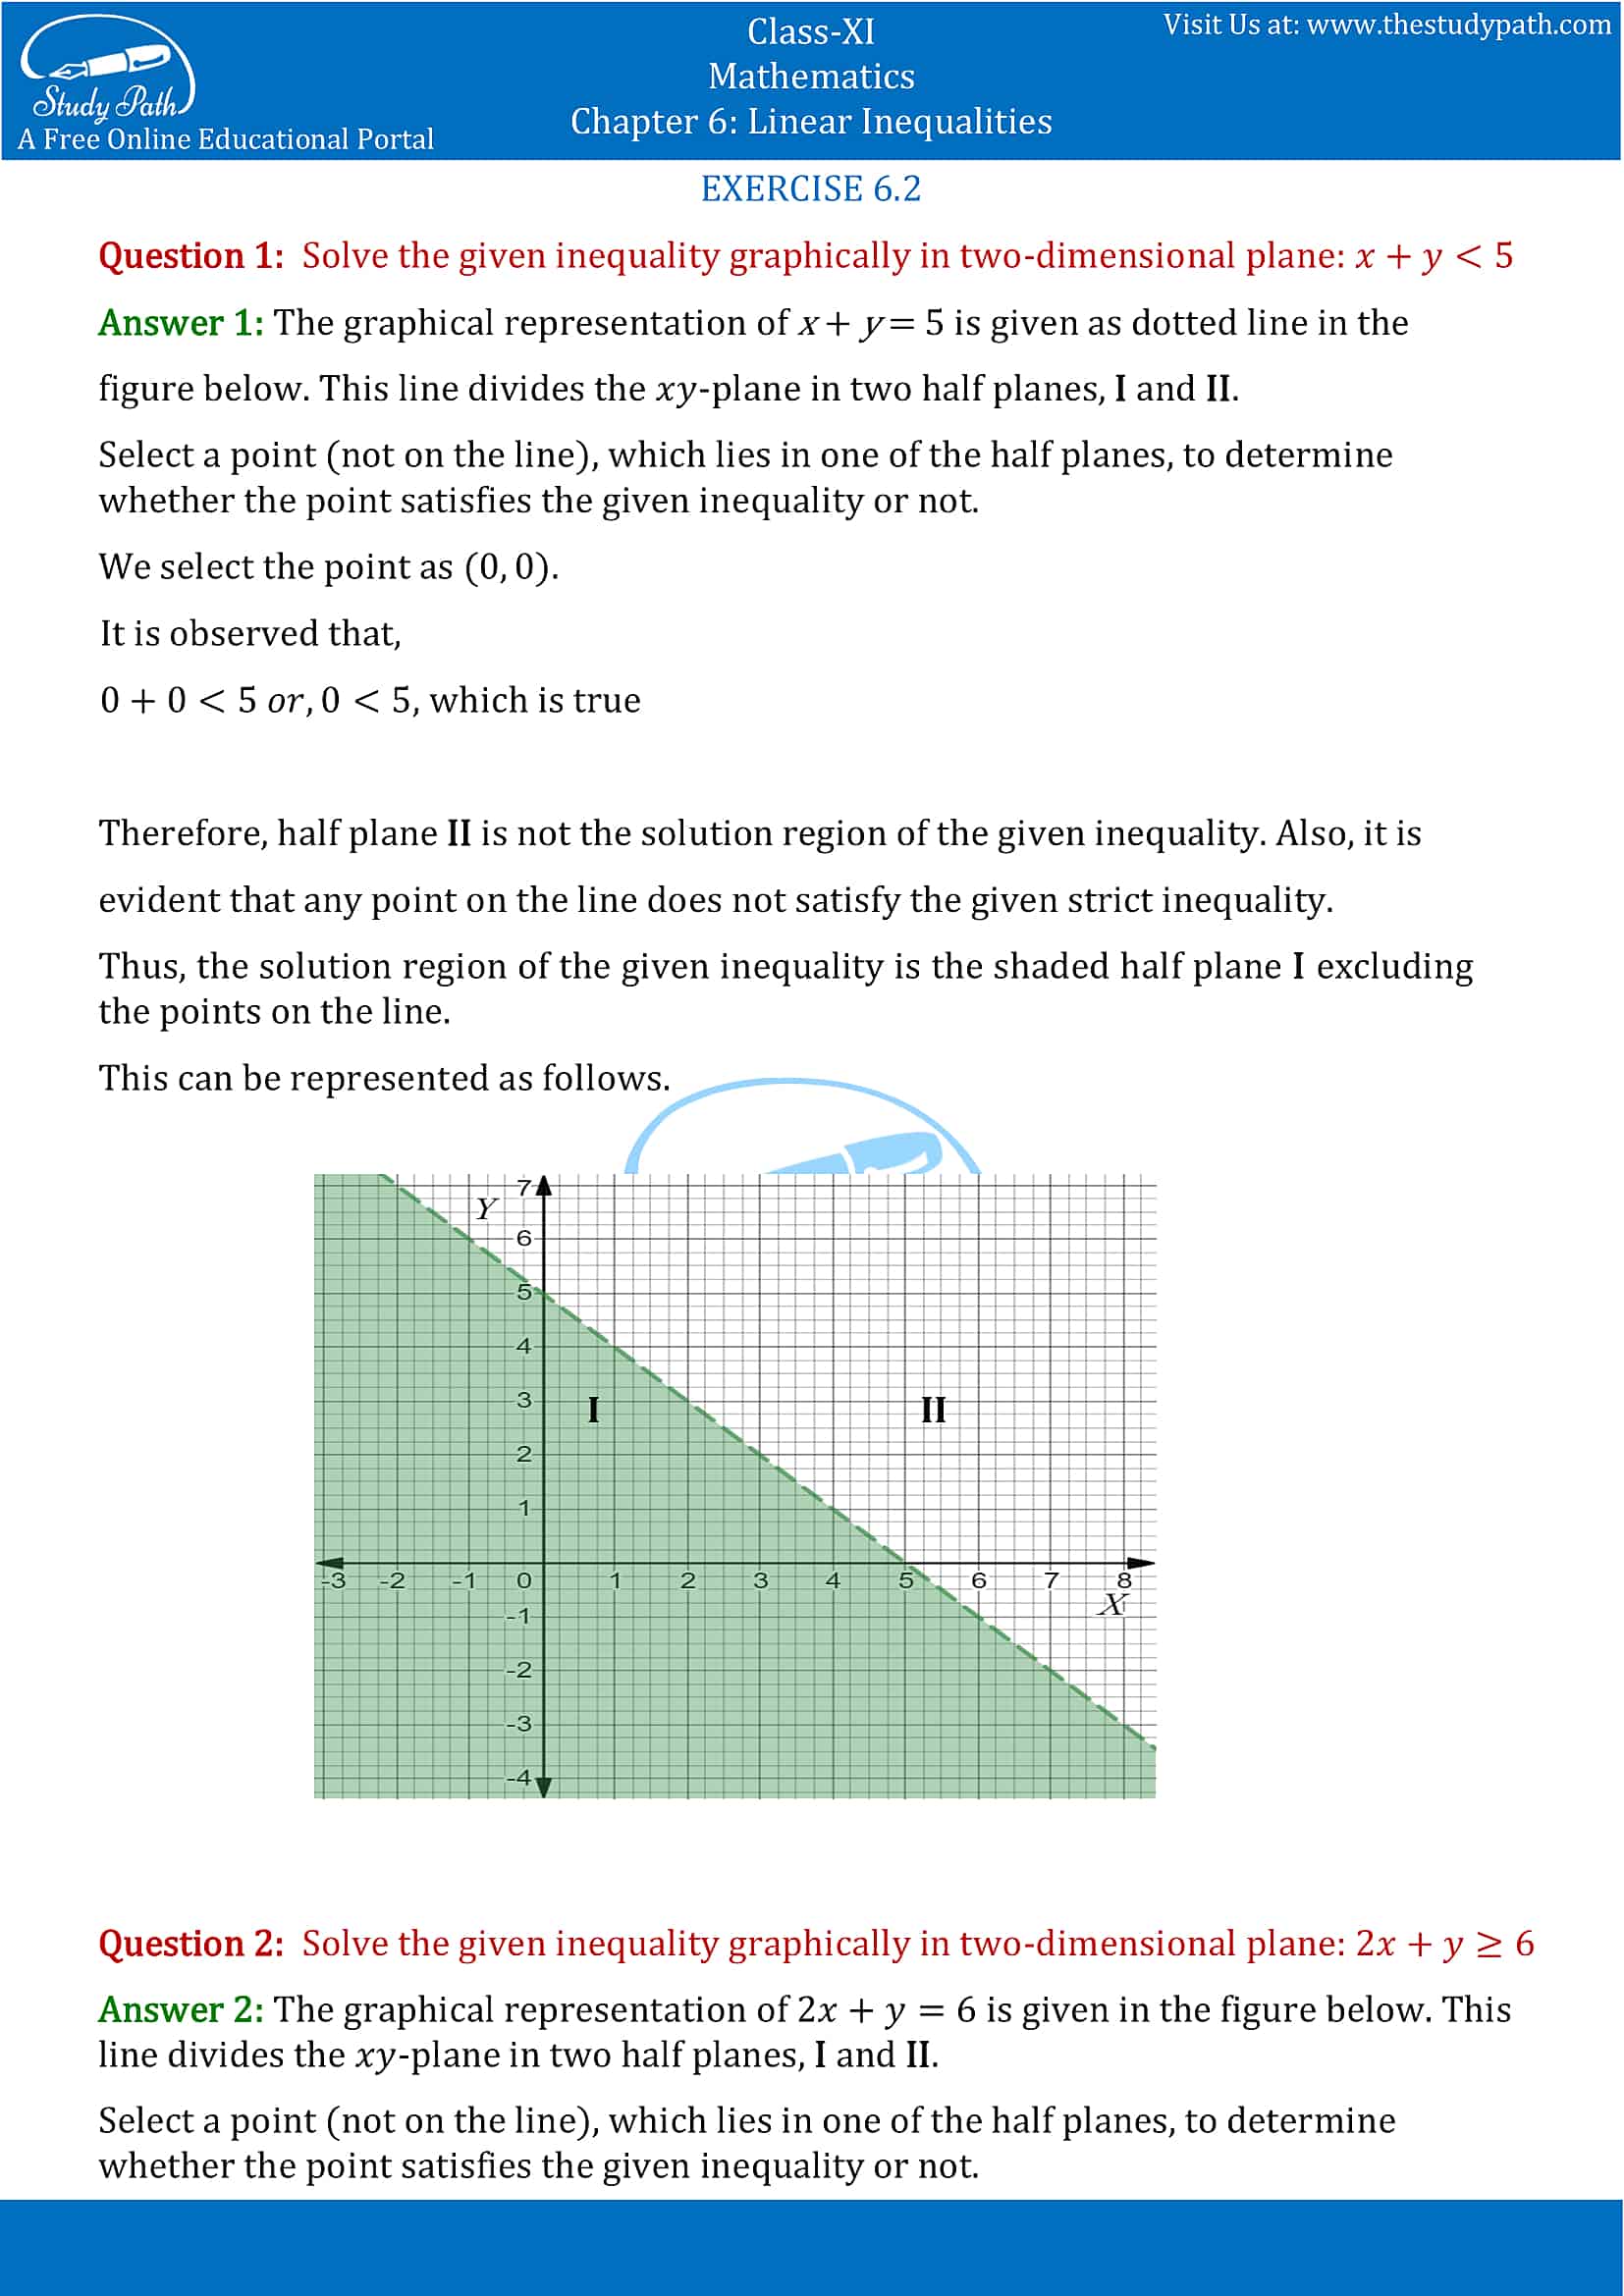 NCERT Solutions for Class 11 Maths chapter 6 Linear Inequalities Exercise 6.2 Part-1